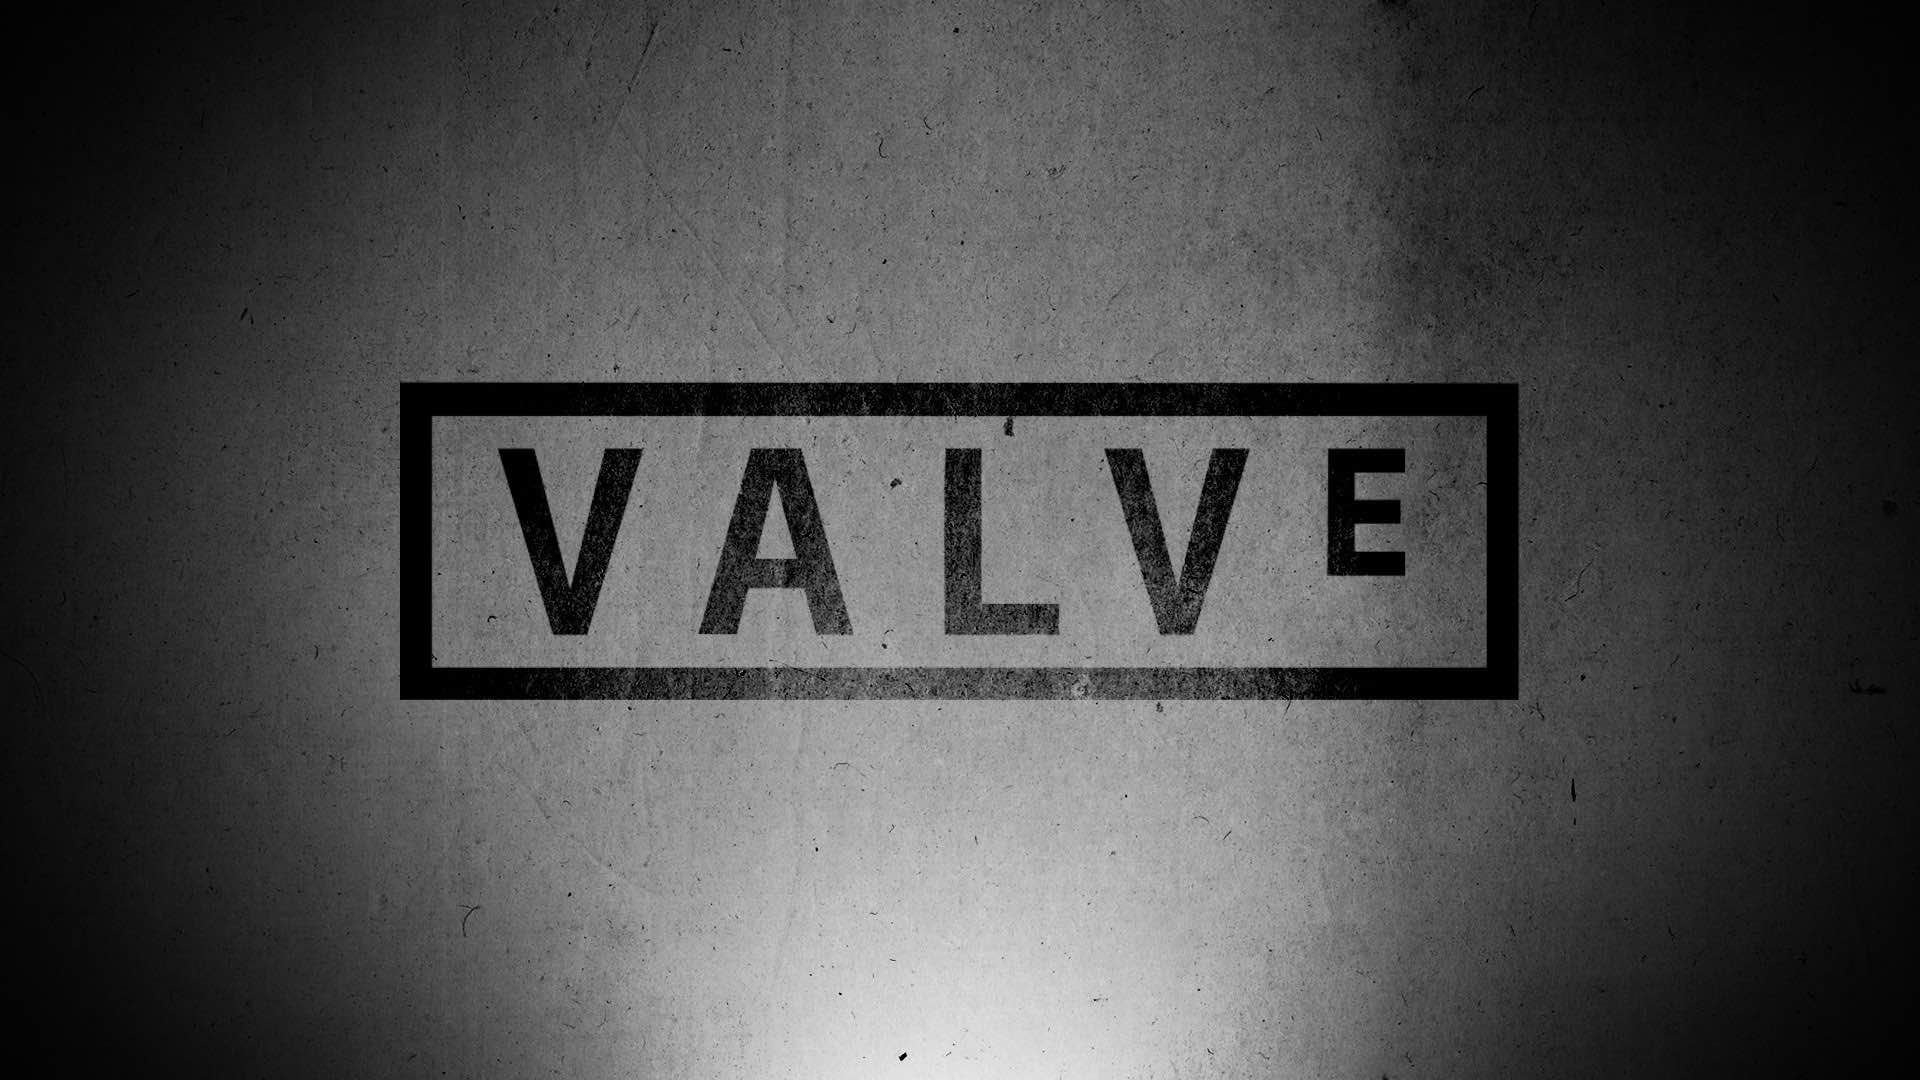 Valve suddenly announced a new game